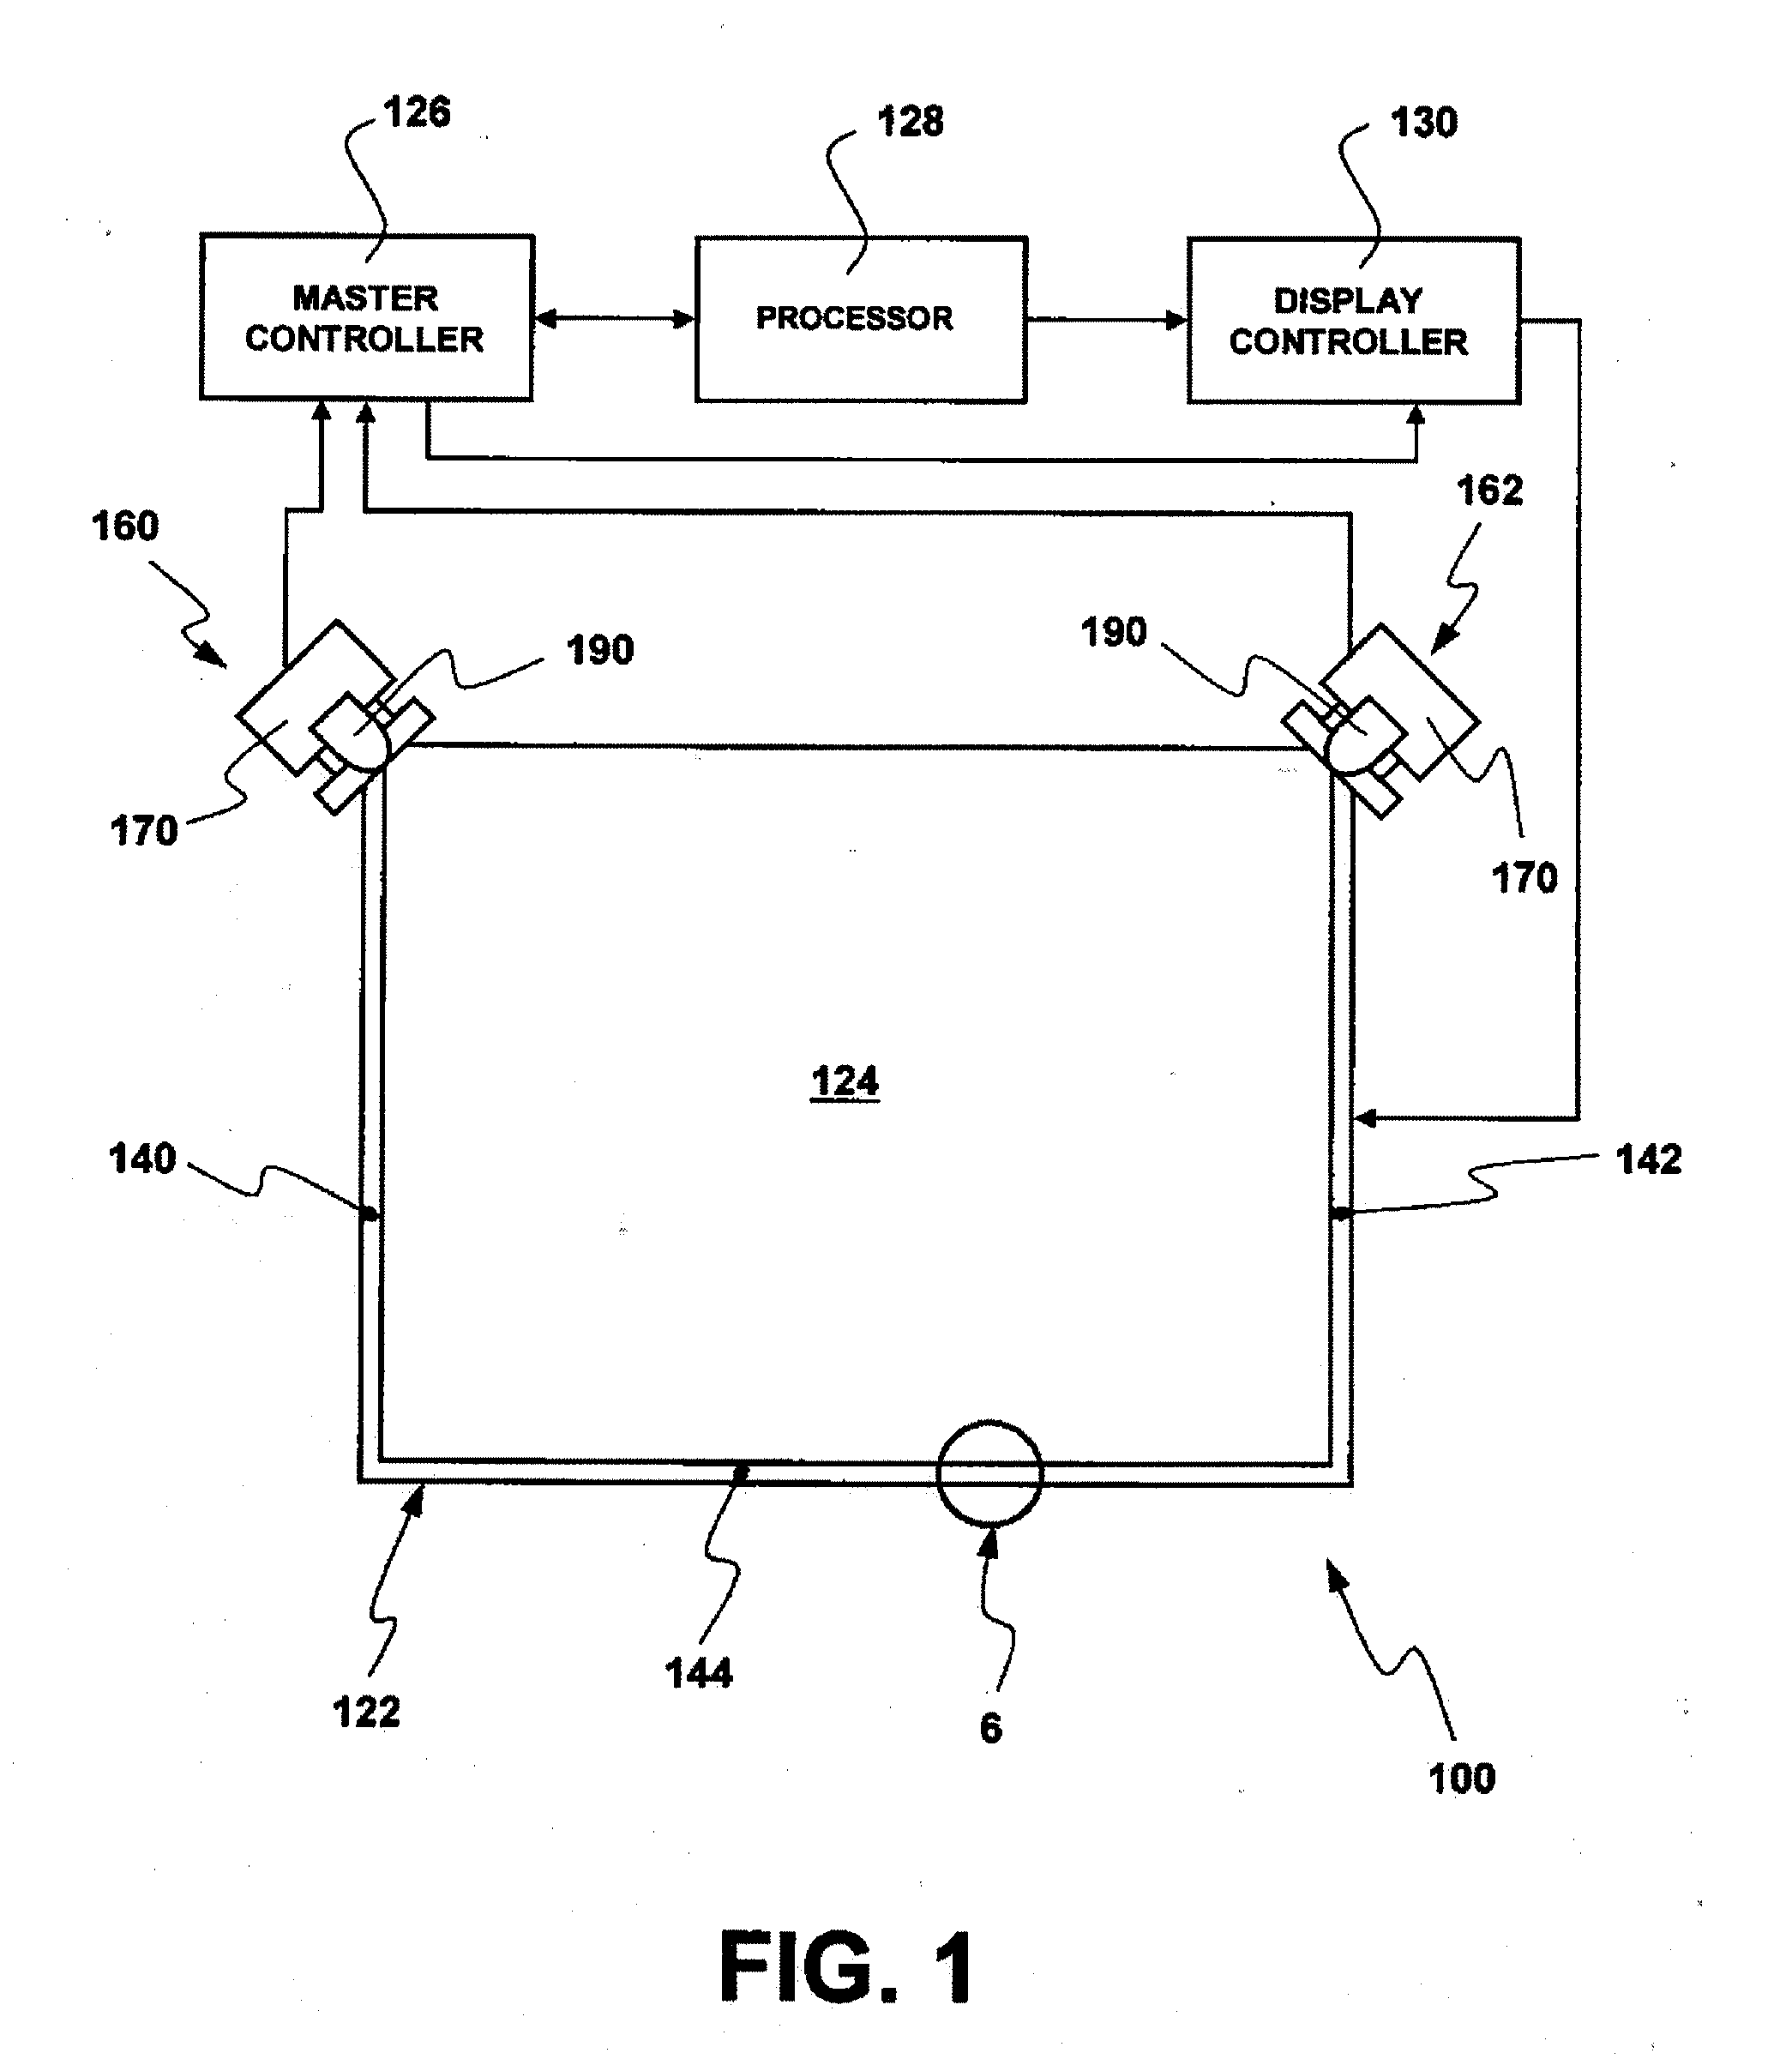 Interactive input system incorporating multi-angle reflecting structure